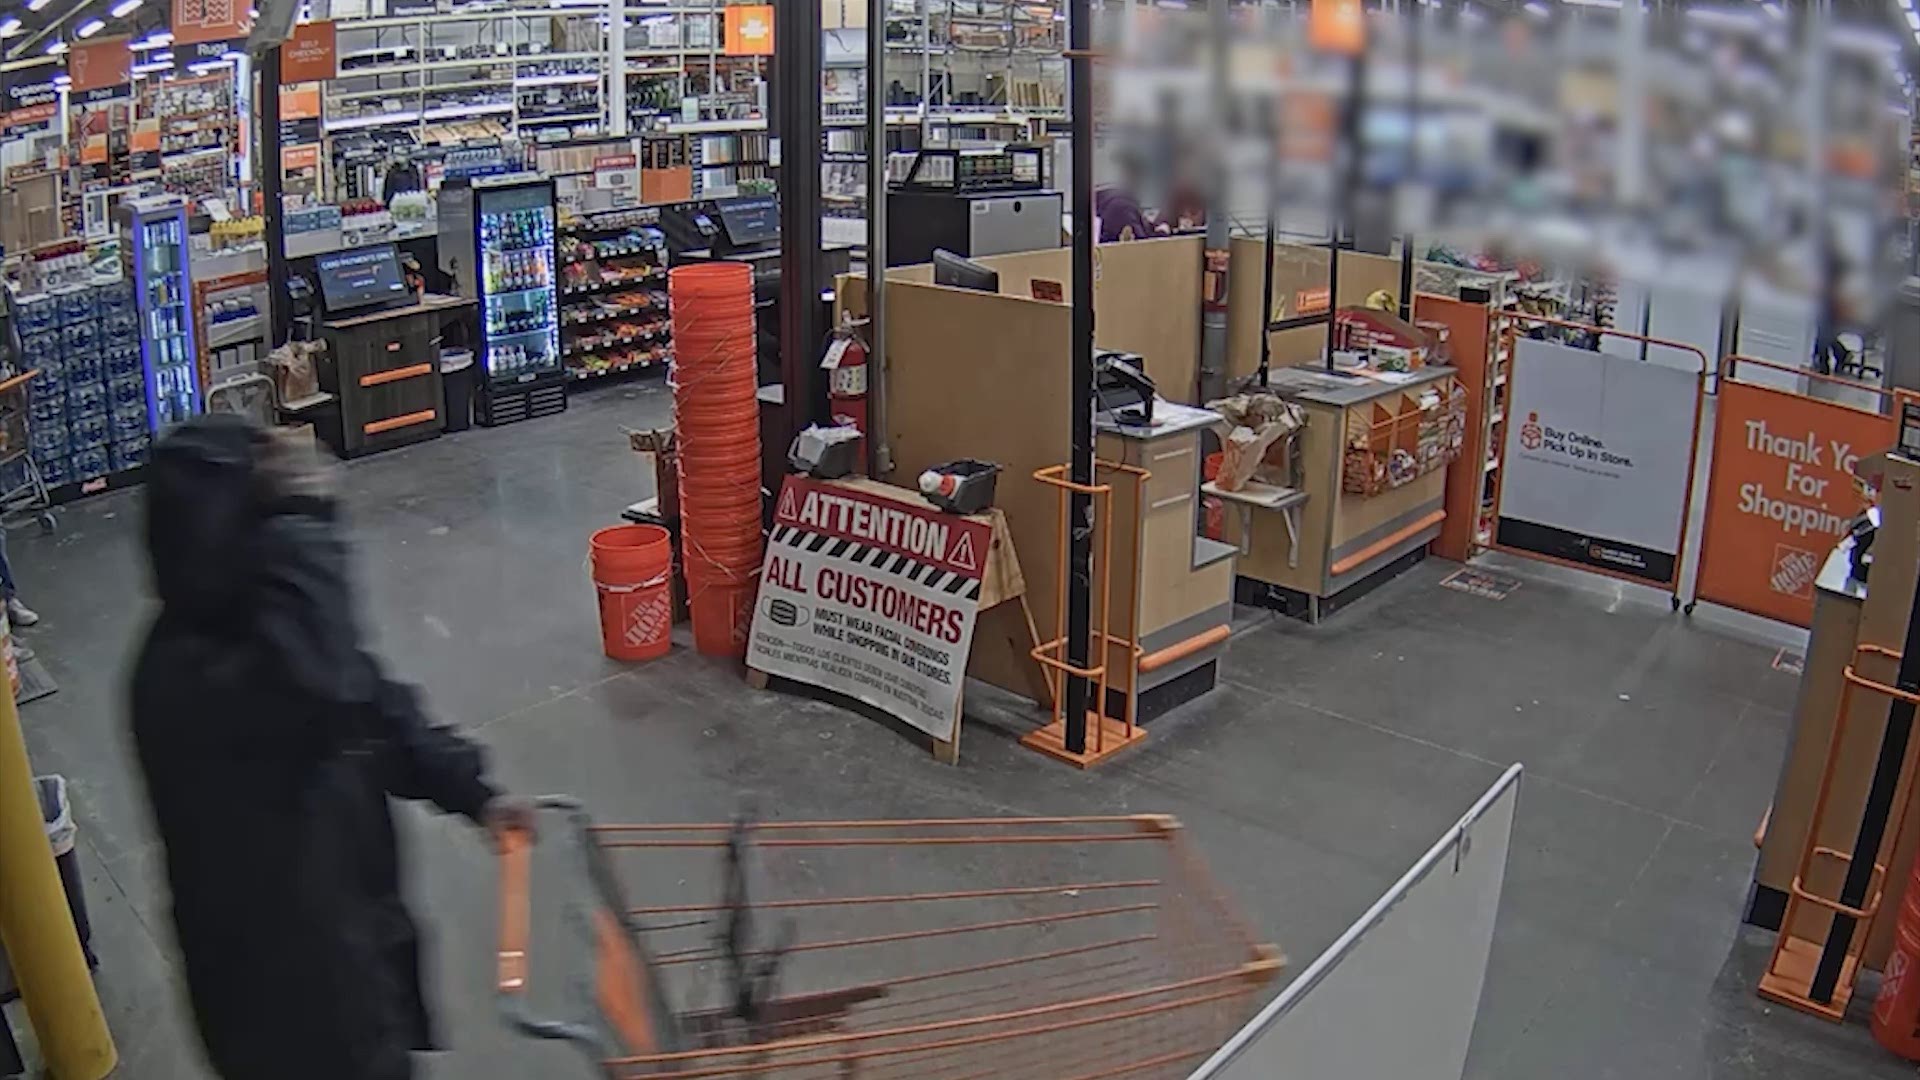 2 men sought in Home Depot armed robbery in Golden, Colorado